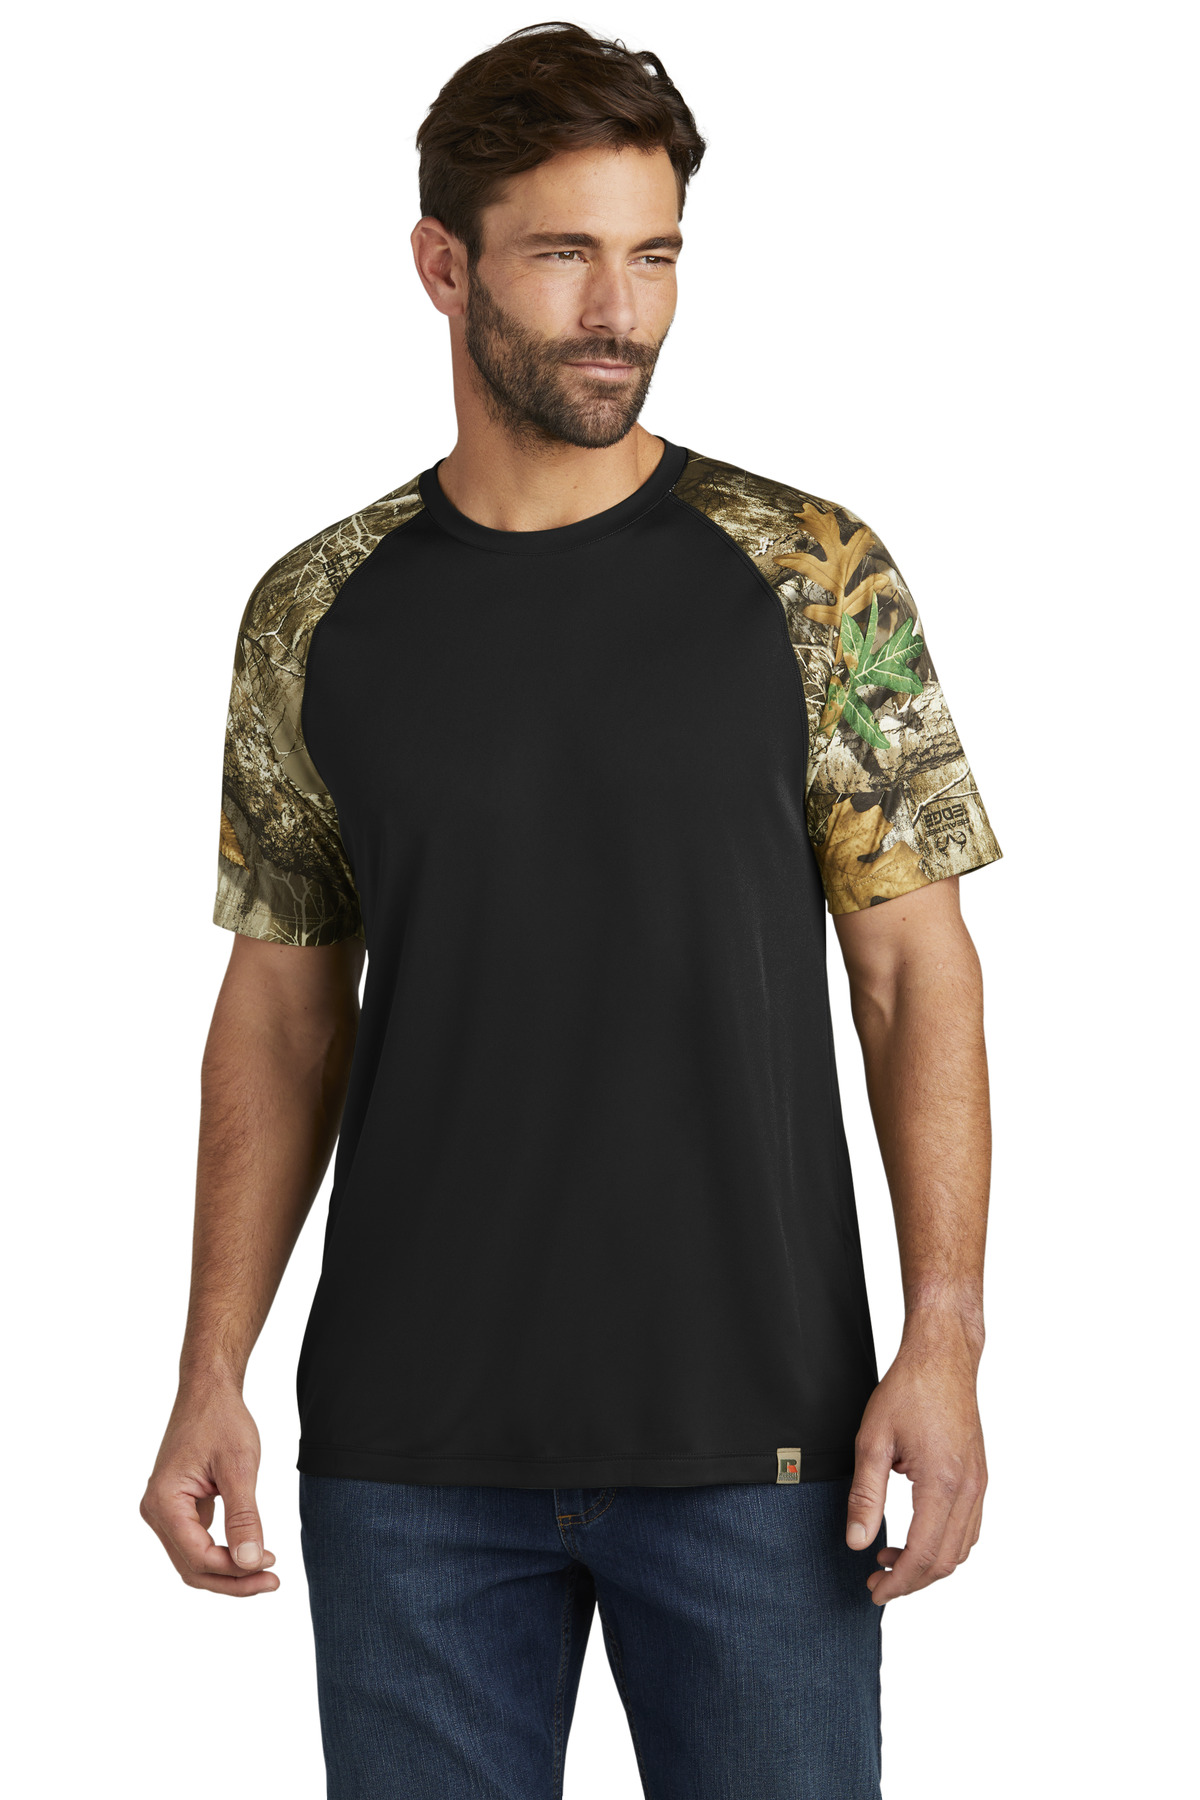 Russell Outdoors Realtree Colorblock Performance Tee-